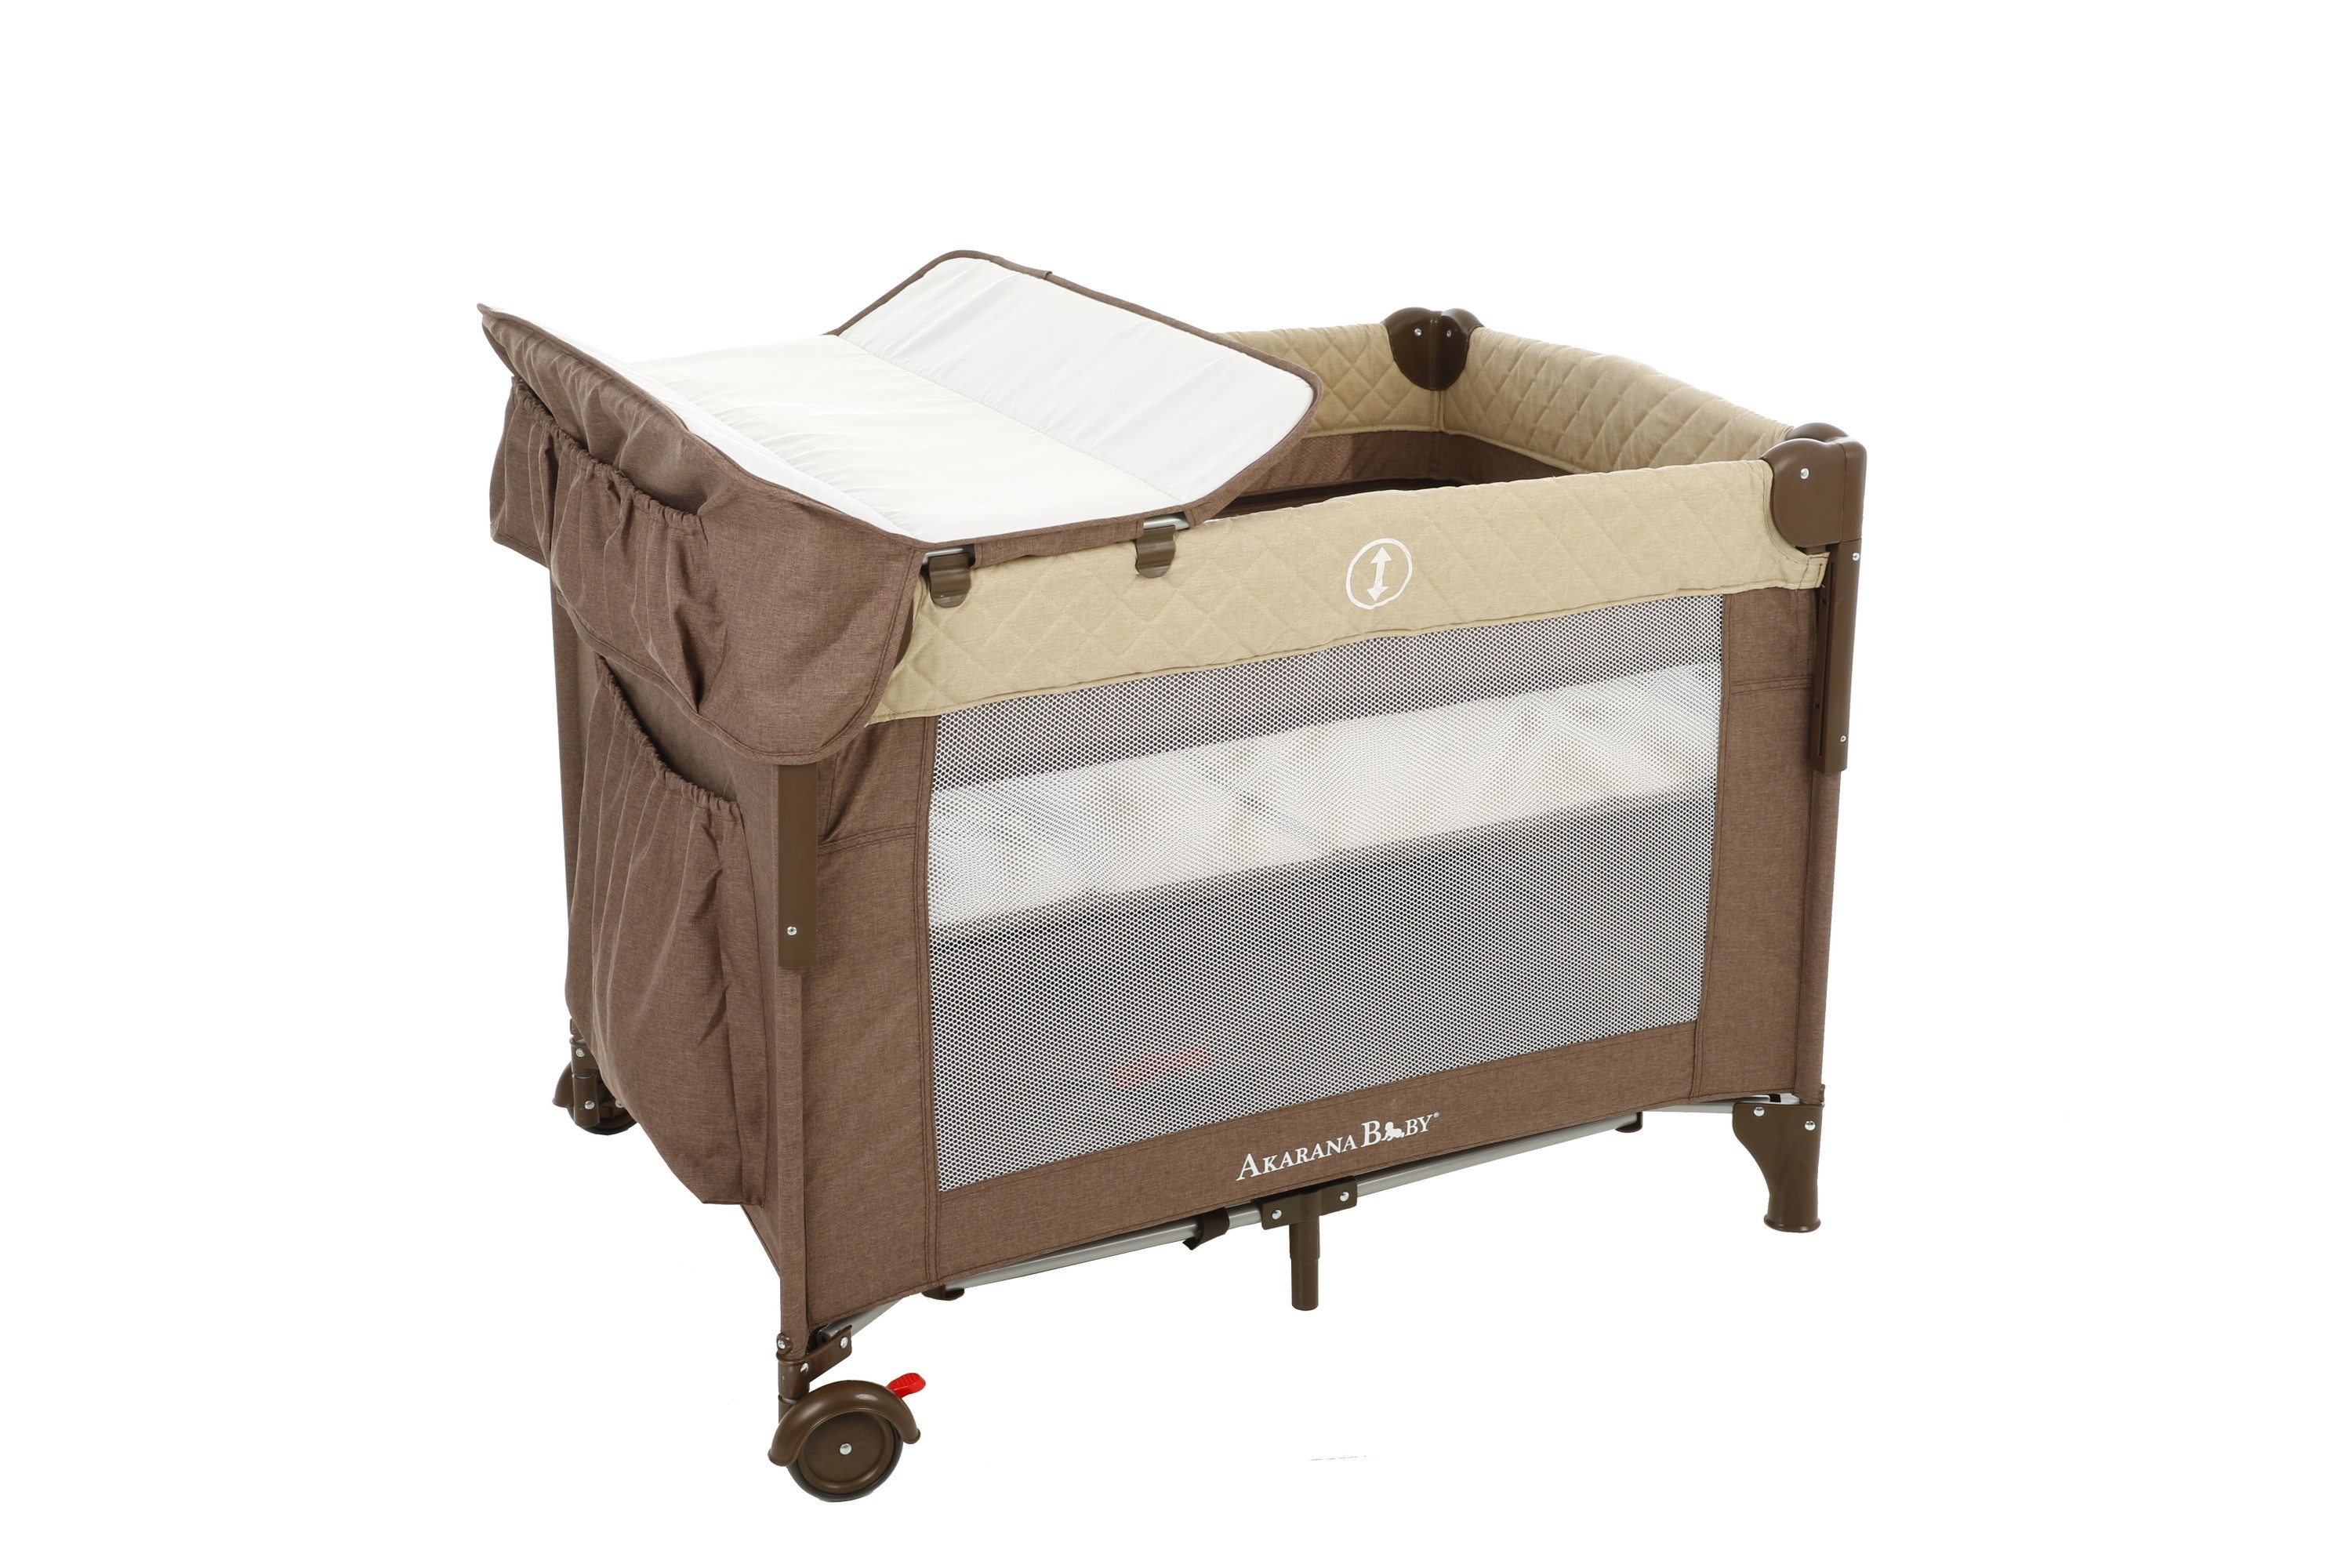 playard with bassinet and changer